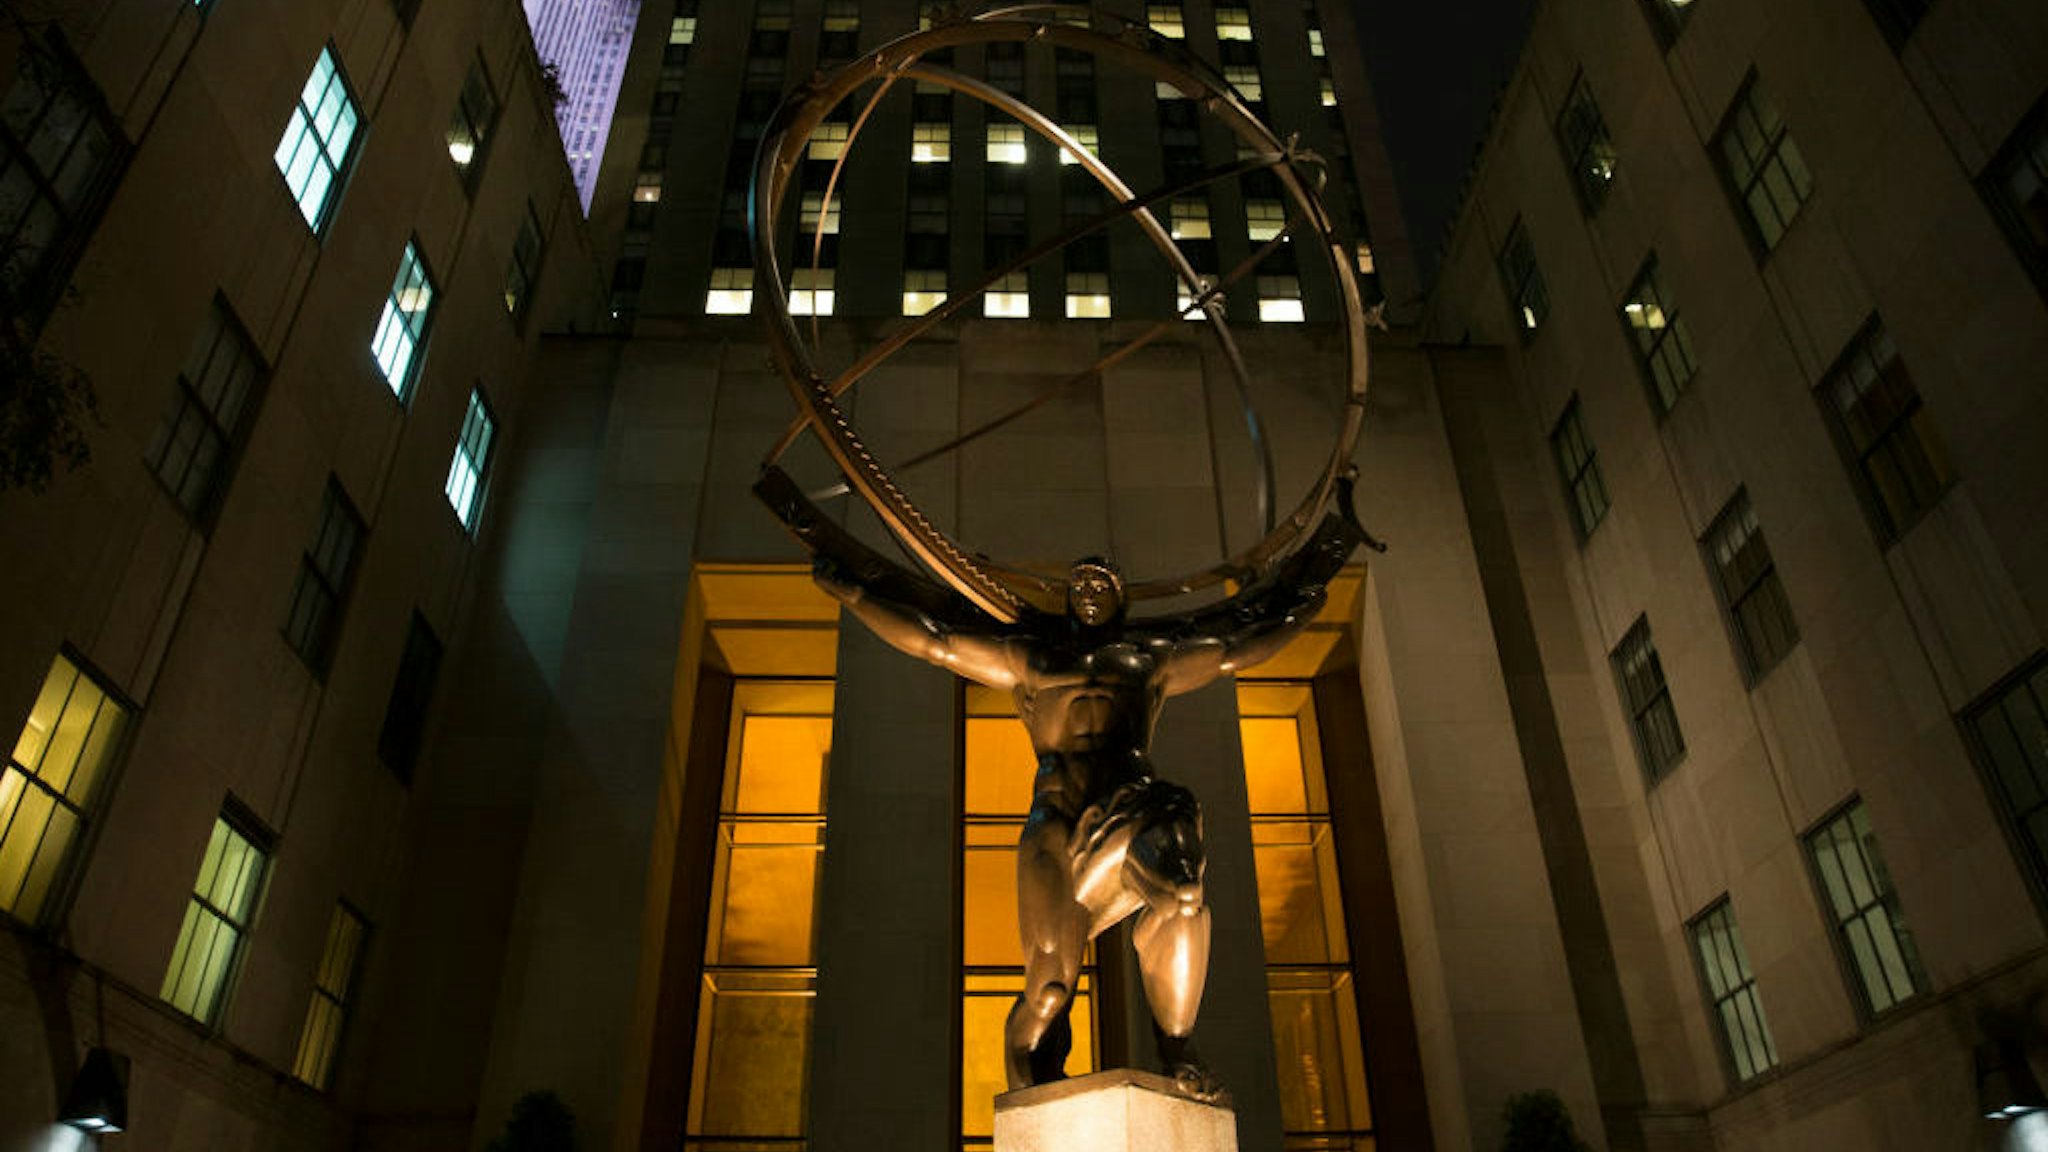 Atlas statue at Rockefeller Center in New York, United States, on October 11, 2017. (Photo by Manuel Romano/NurPhoto via Getty Images)